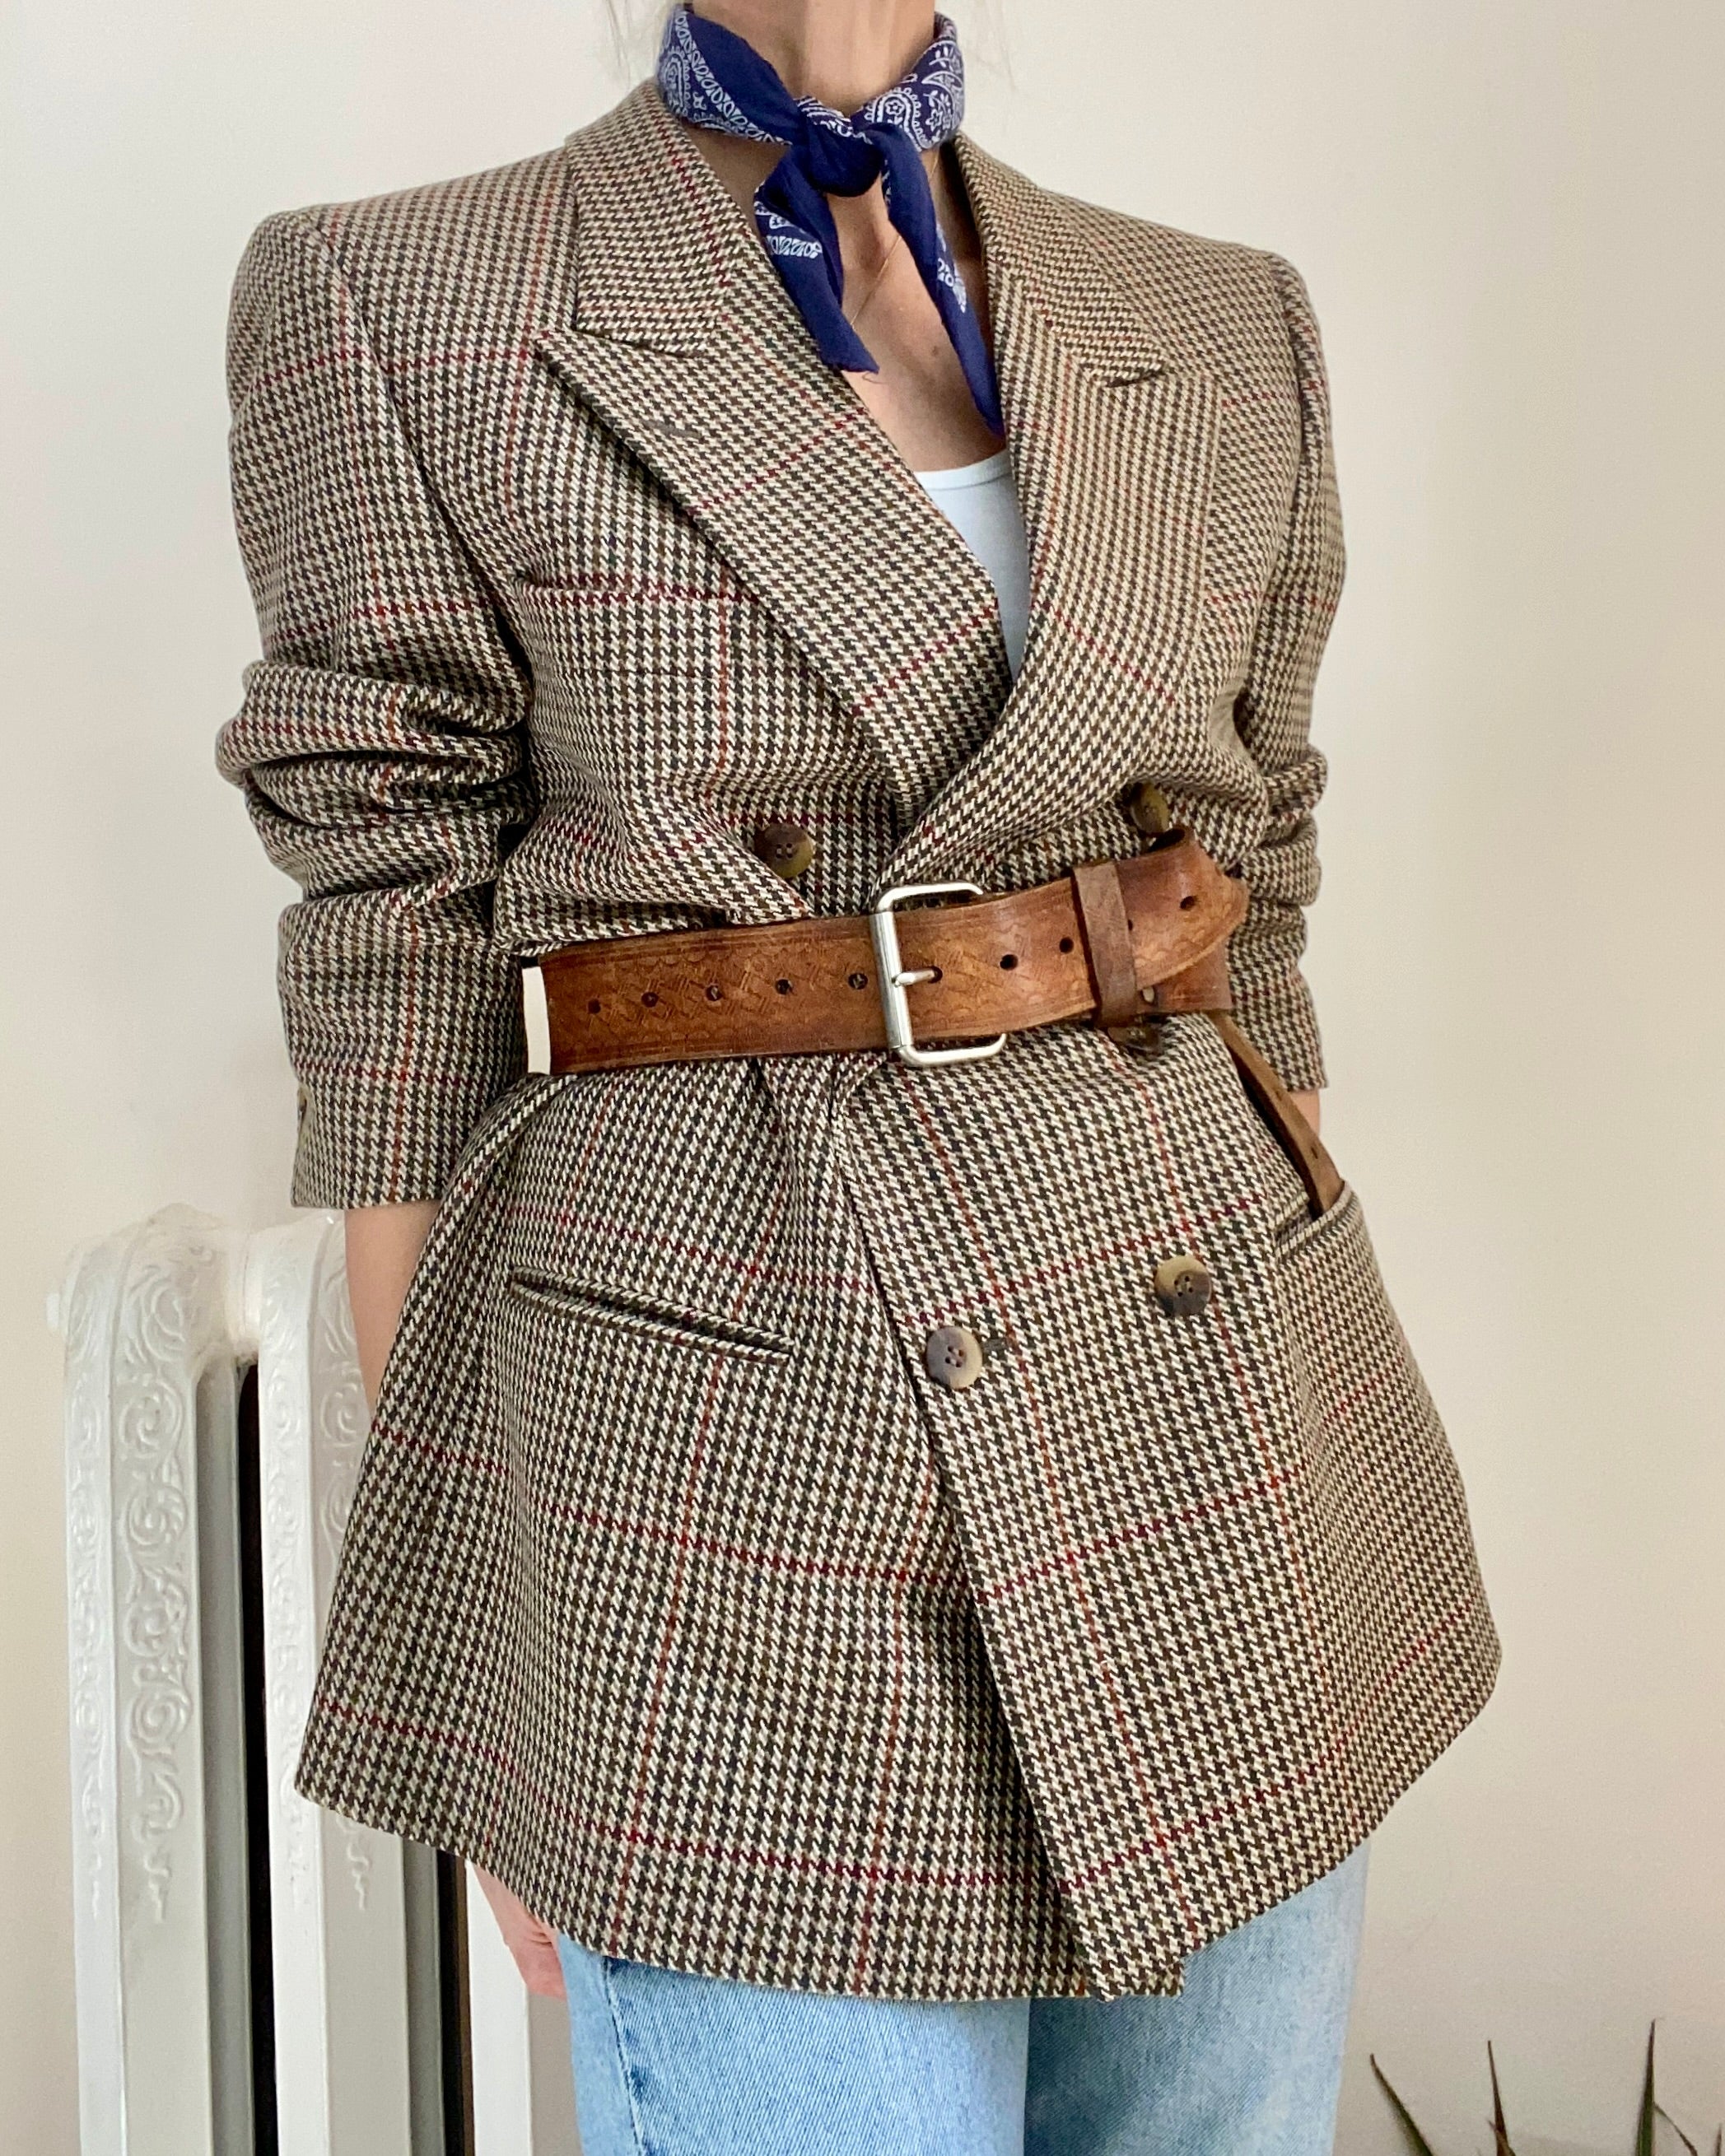 Vintage Double Breasted Brown and Green Wool Houndstooth Blazer L